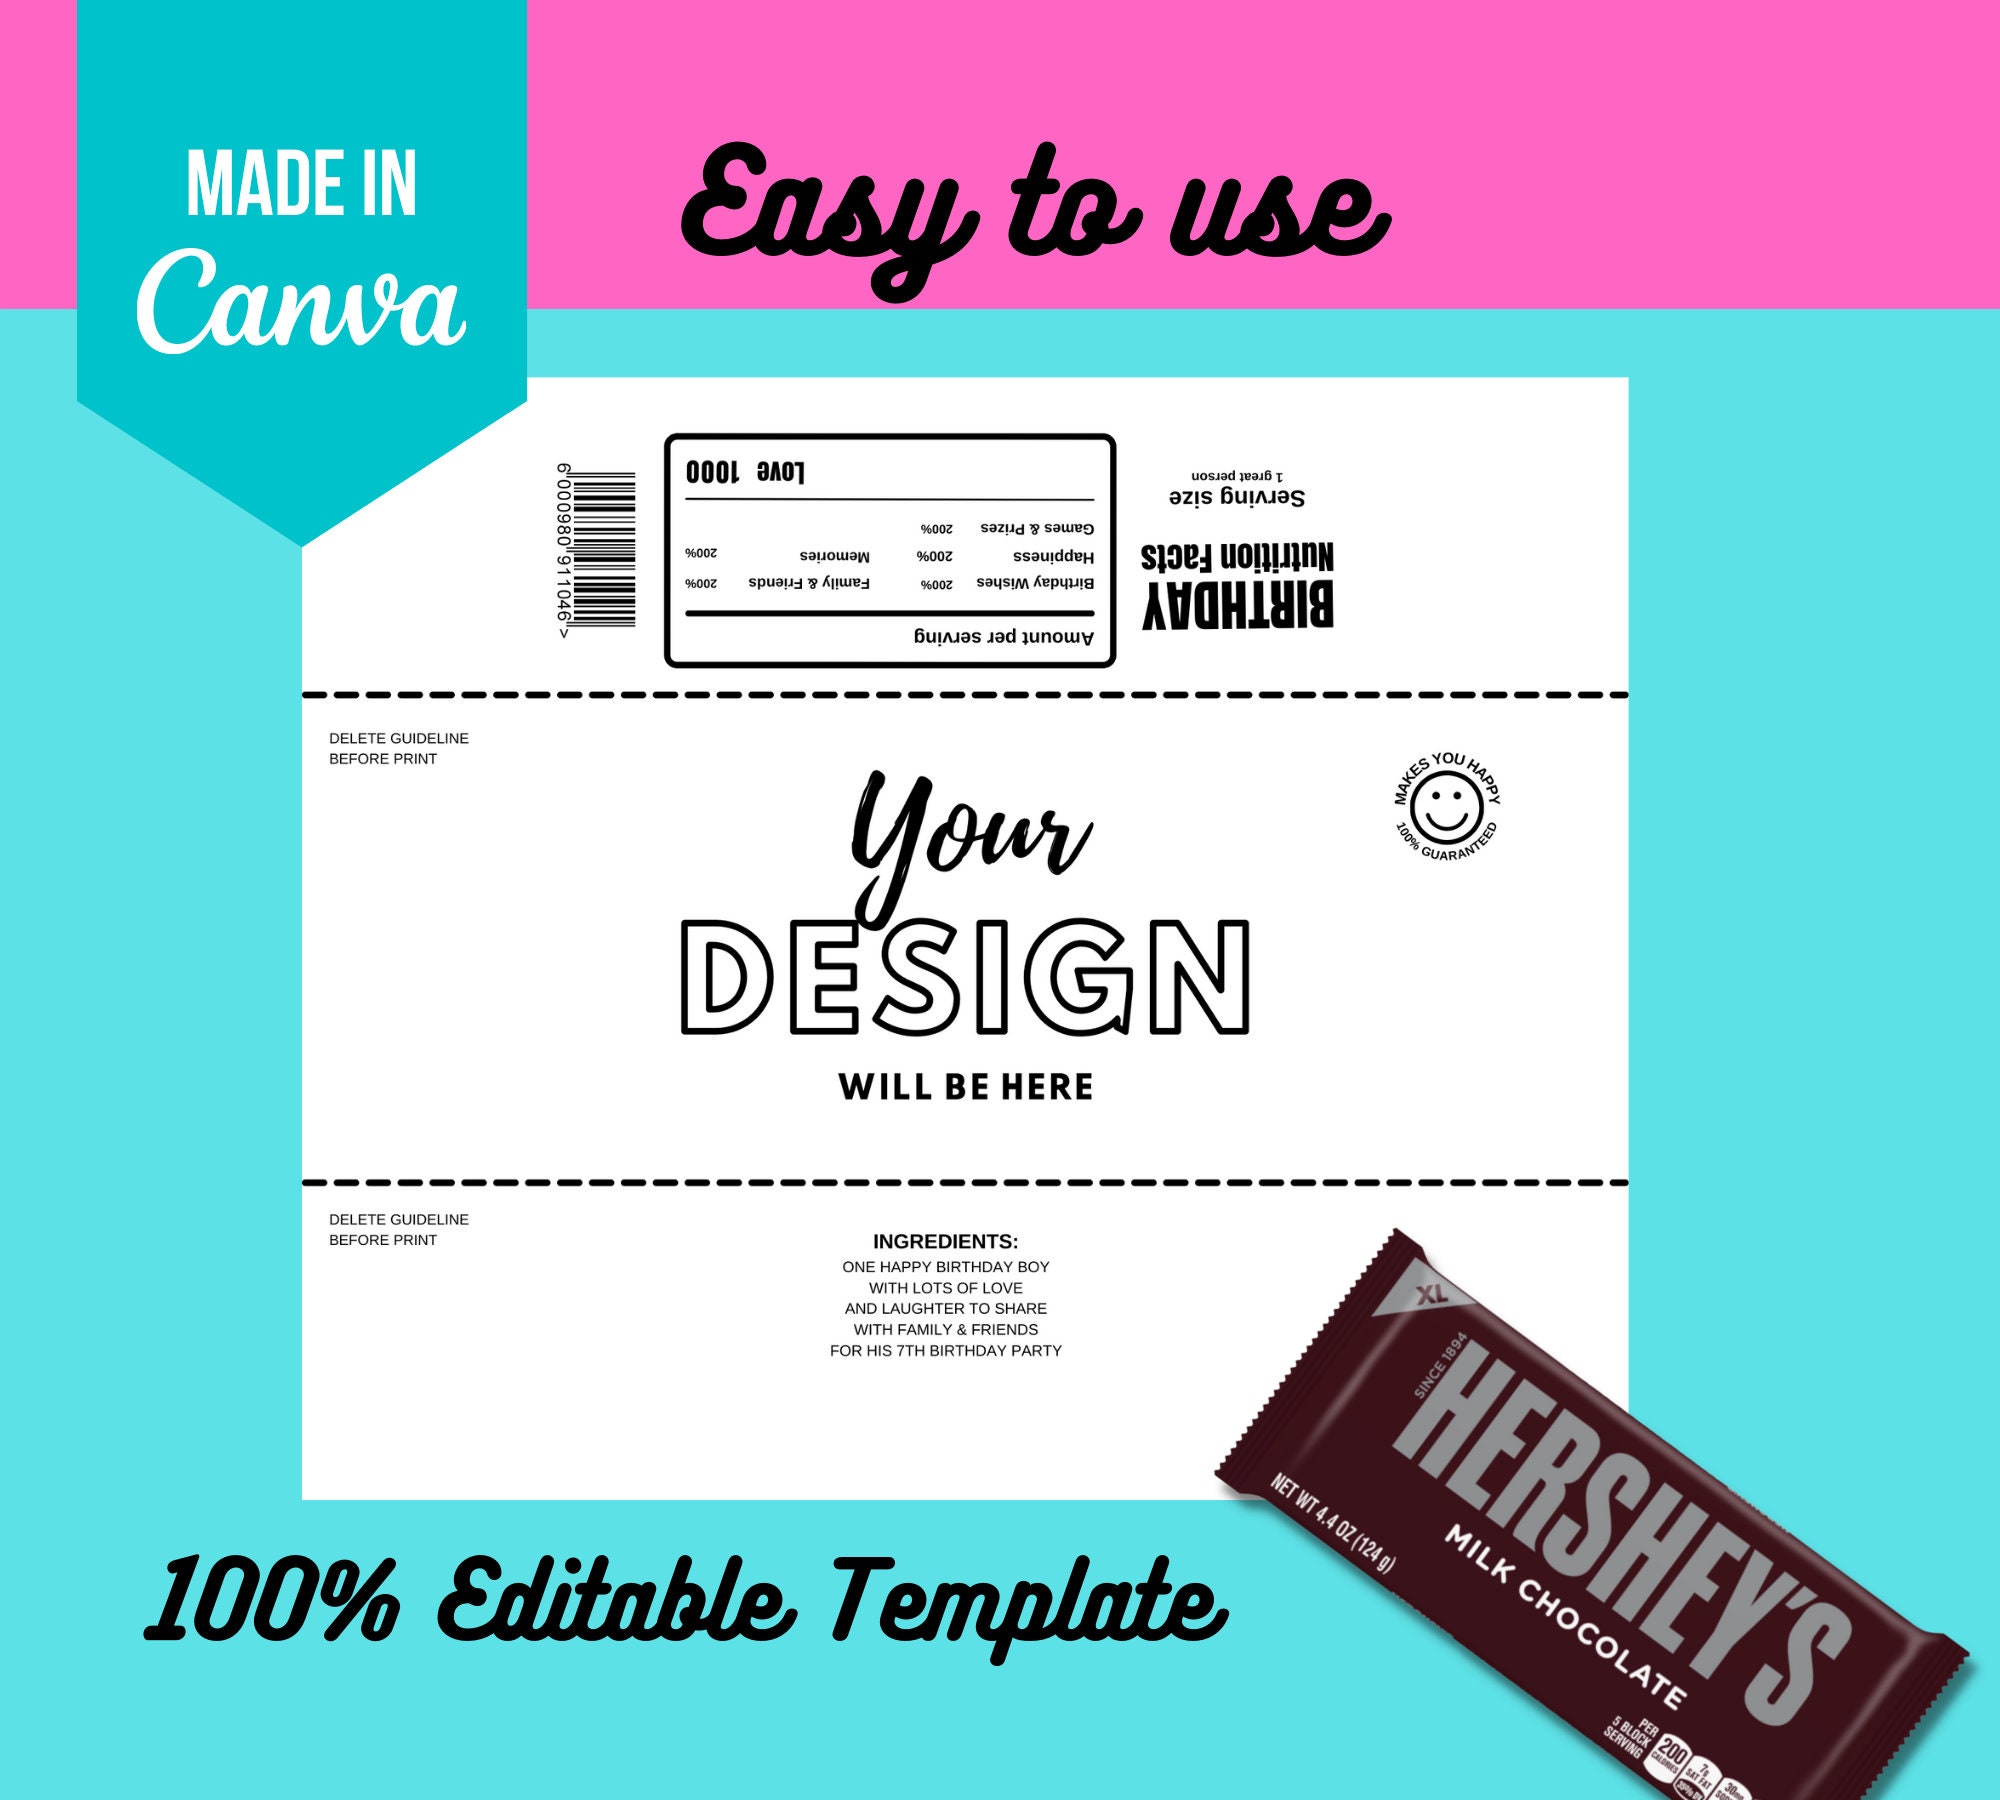 Blank Chocolate Wrapper Template Canva Editable pic pic